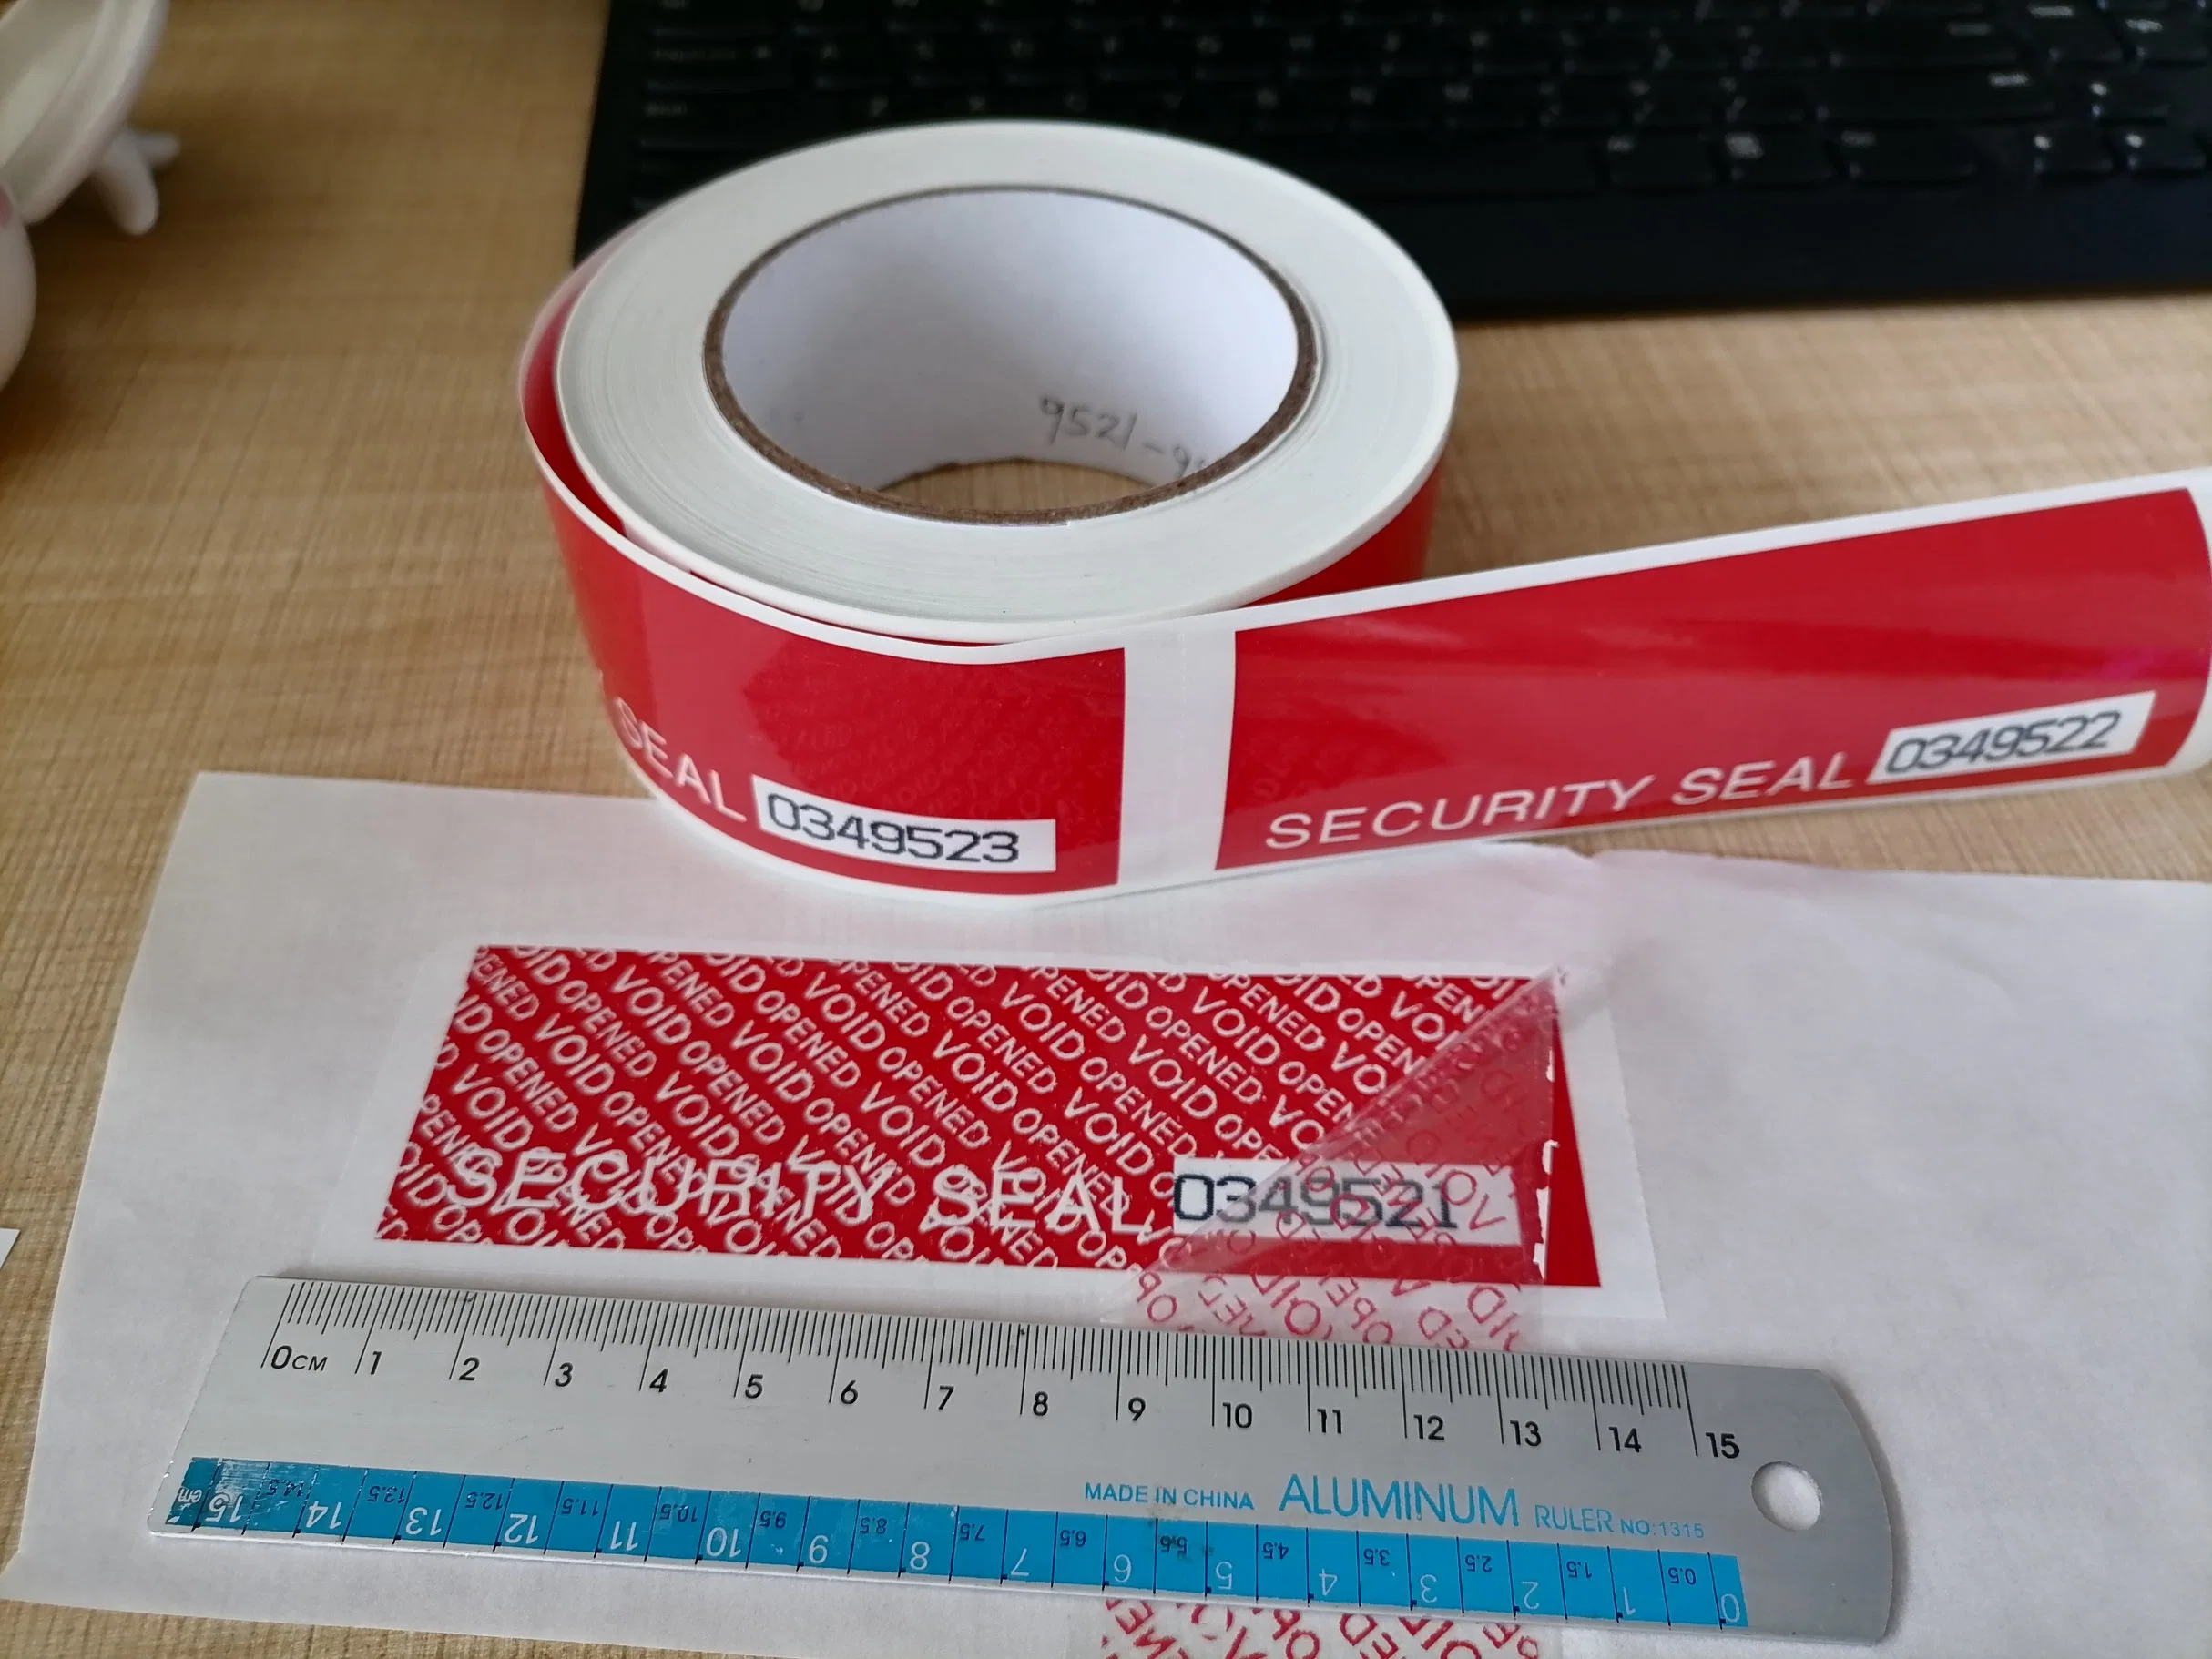 Total Transfer Warranty Void If Seal Broken Stickers Anti Security Void Seal Tape